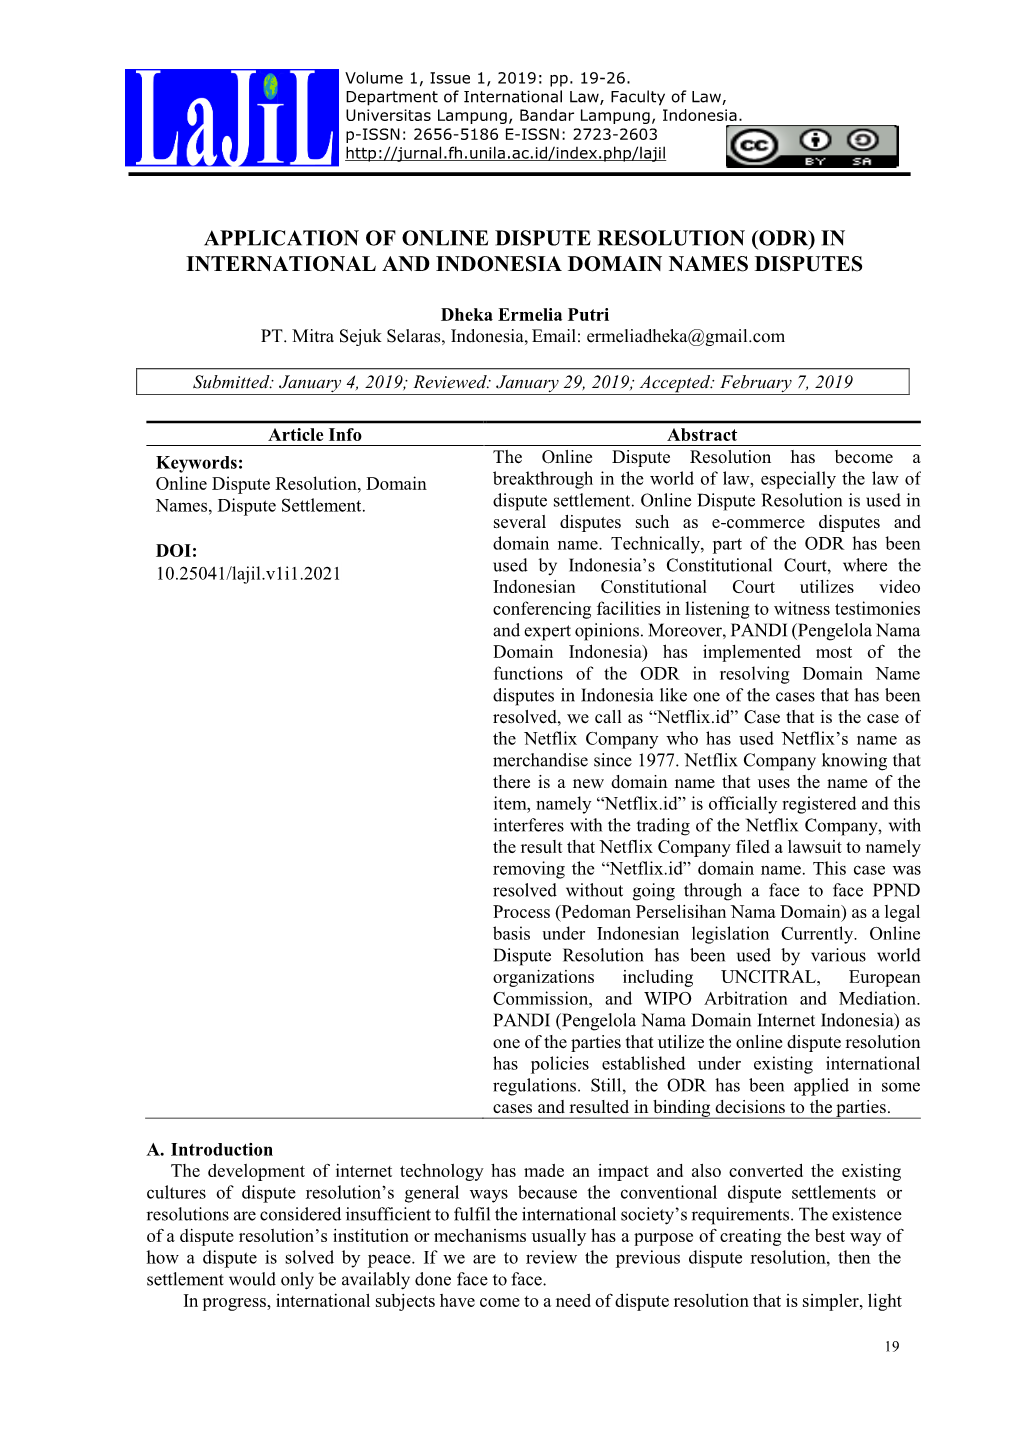 Application of Online Dispute Resolution (Odr) in International and Indonesia Domain Names Disputes